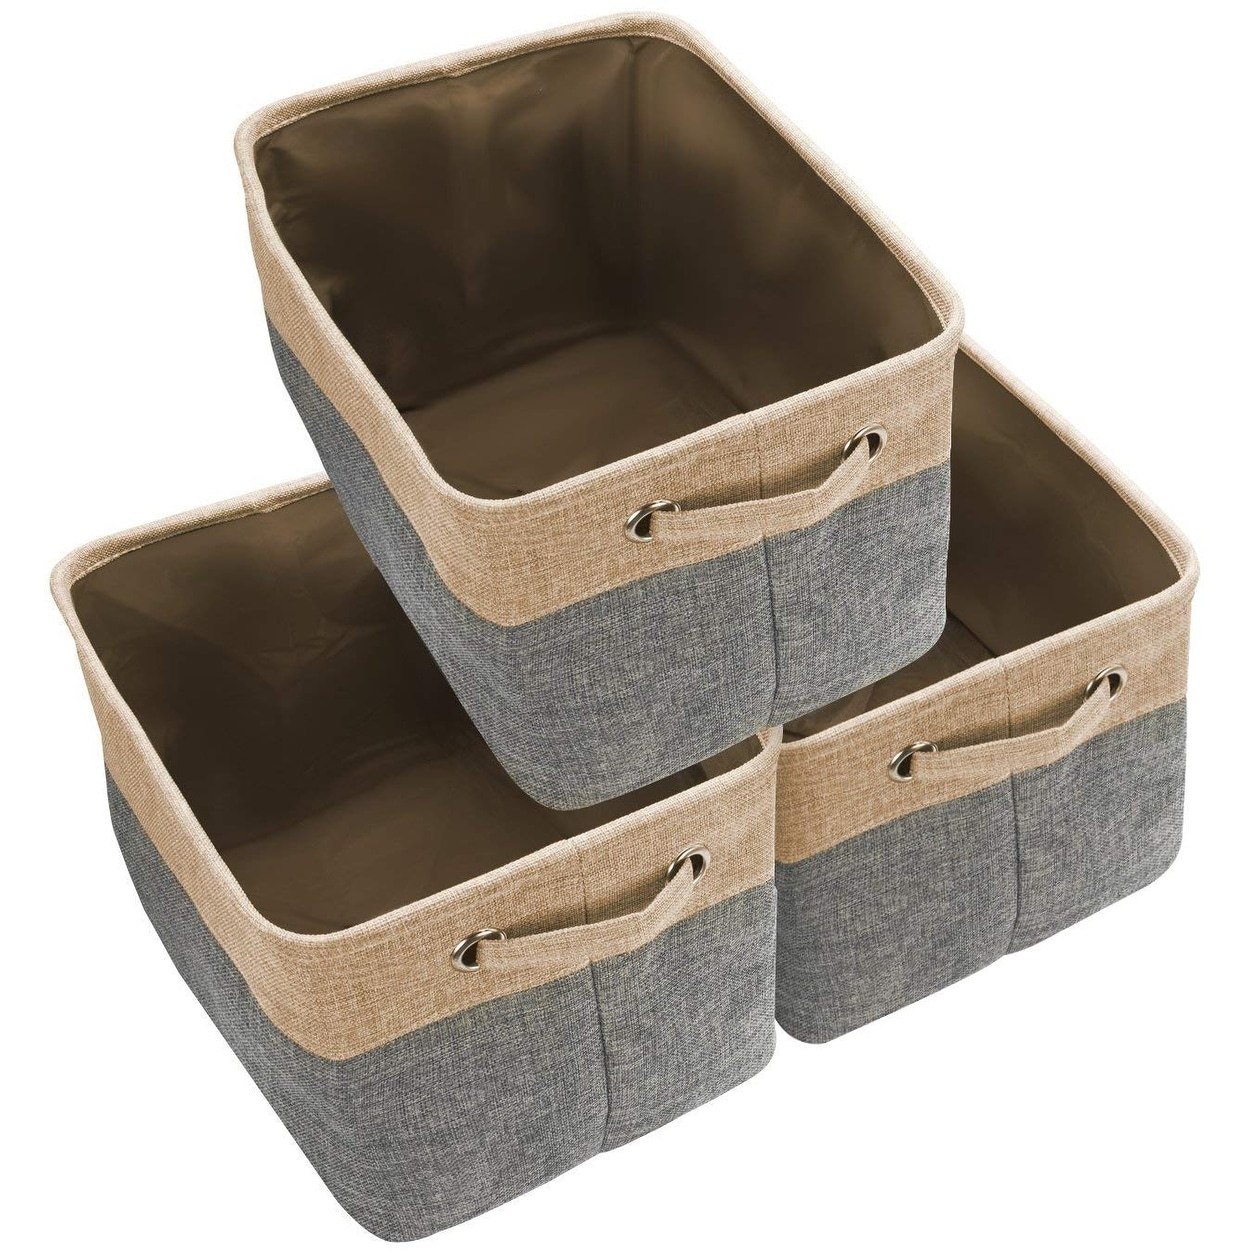 GRANNY SAYS Clothing Storage Bins for Closet with Handles, Foldable  Rectangle Baskets, Fabric Containers Boxes for Organizing Shelves Bedroom,  Gray, Large, 3-Pack